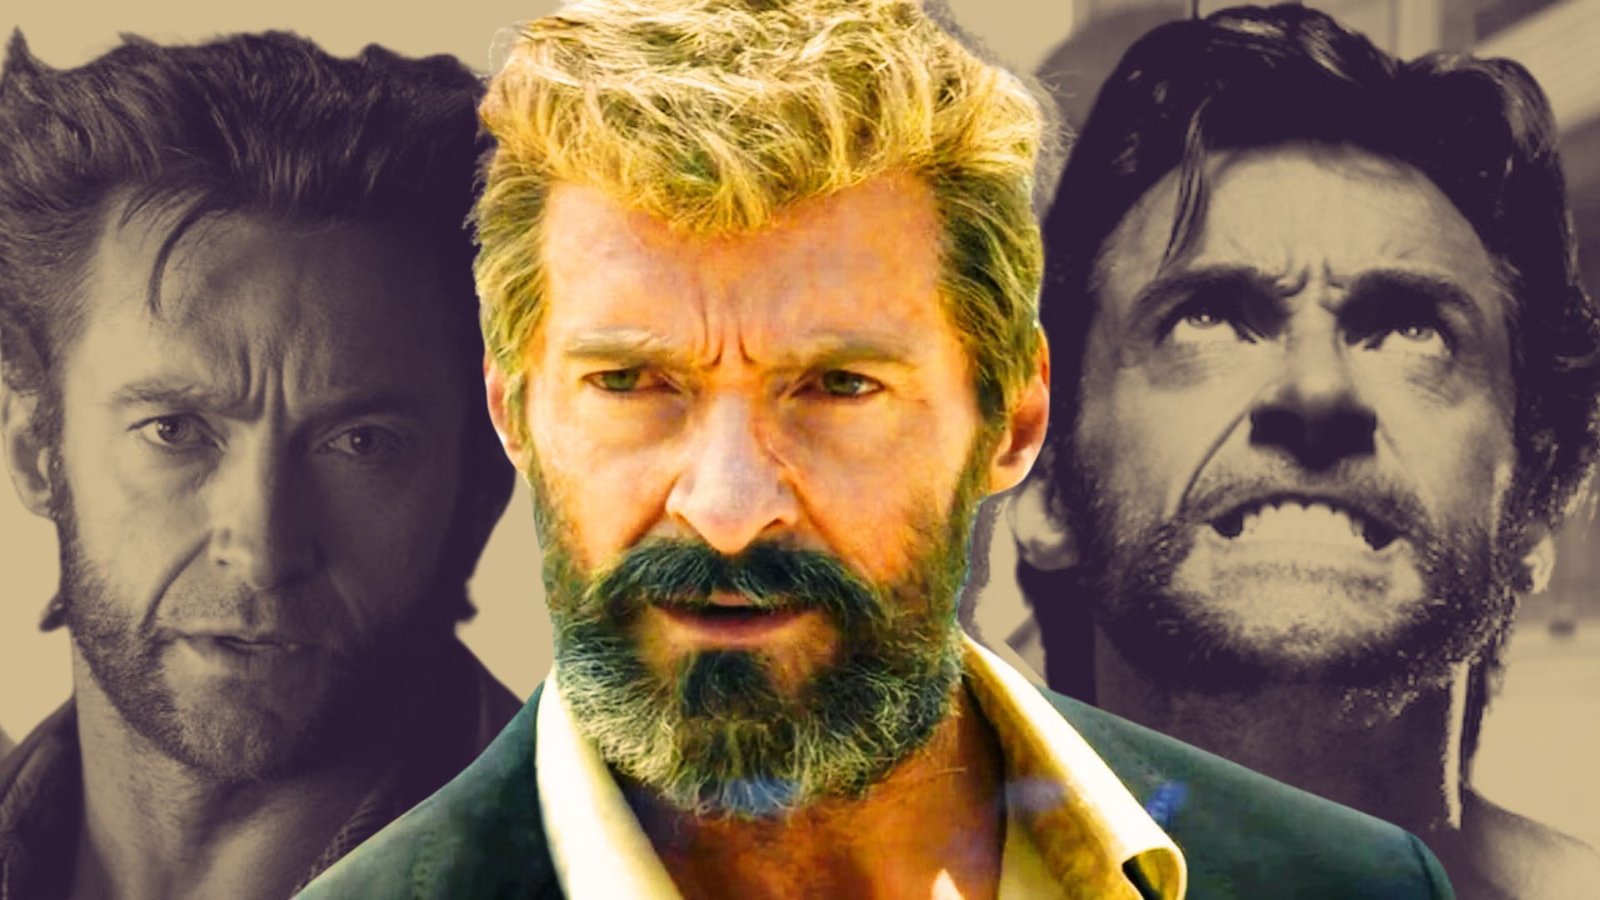 Hugh Jackman's Logan Crowned as the Best in X-Men Franchise by Rotten Tomatoes' Top Films